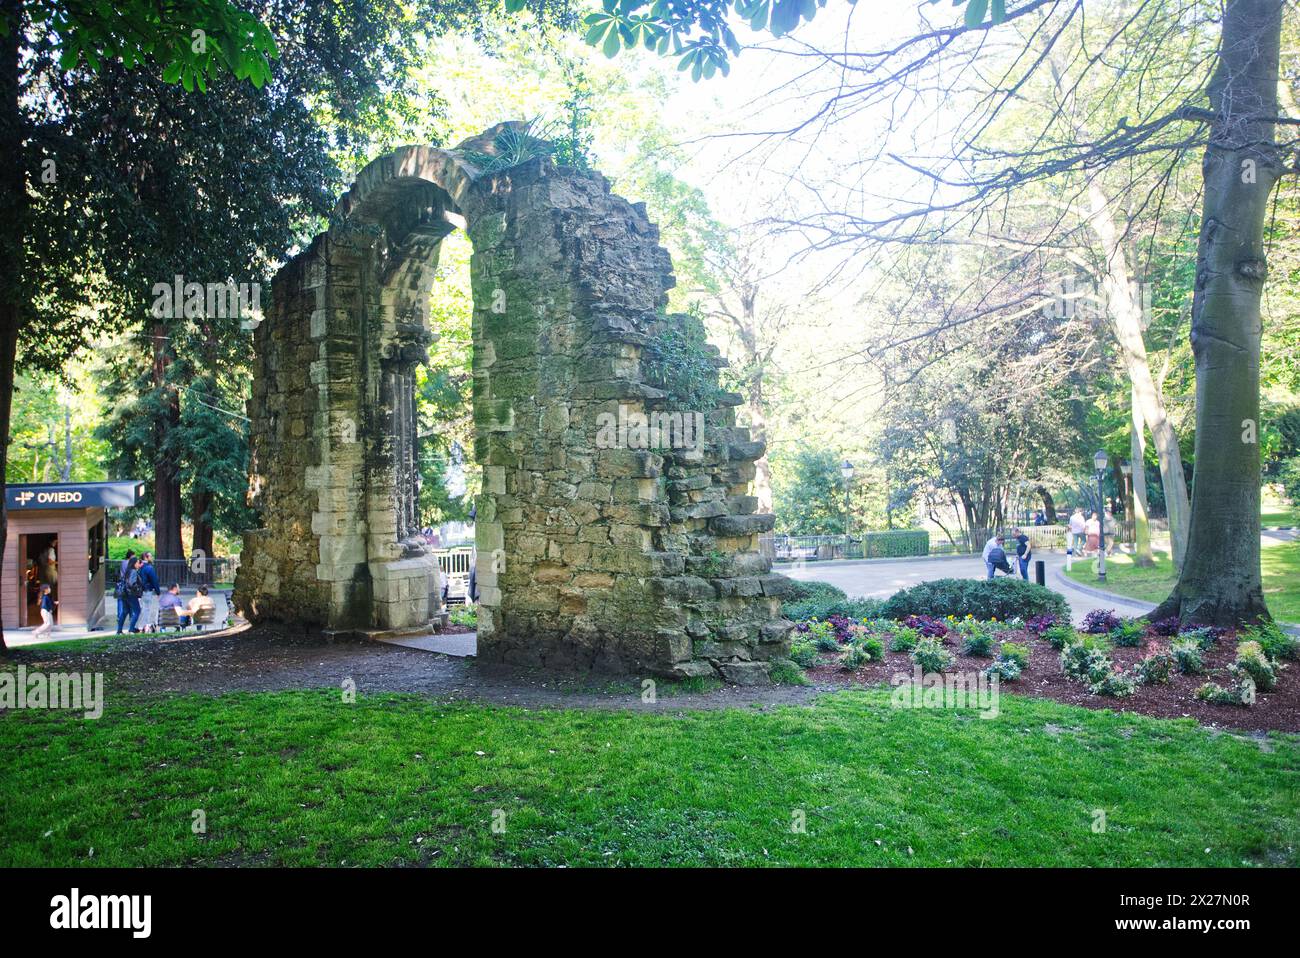 Arch of the doorway of the Romanesque church of San Isidoro, located in the Campo de San Francisco park. Oviedo, Asturias, Spain Stock Photo